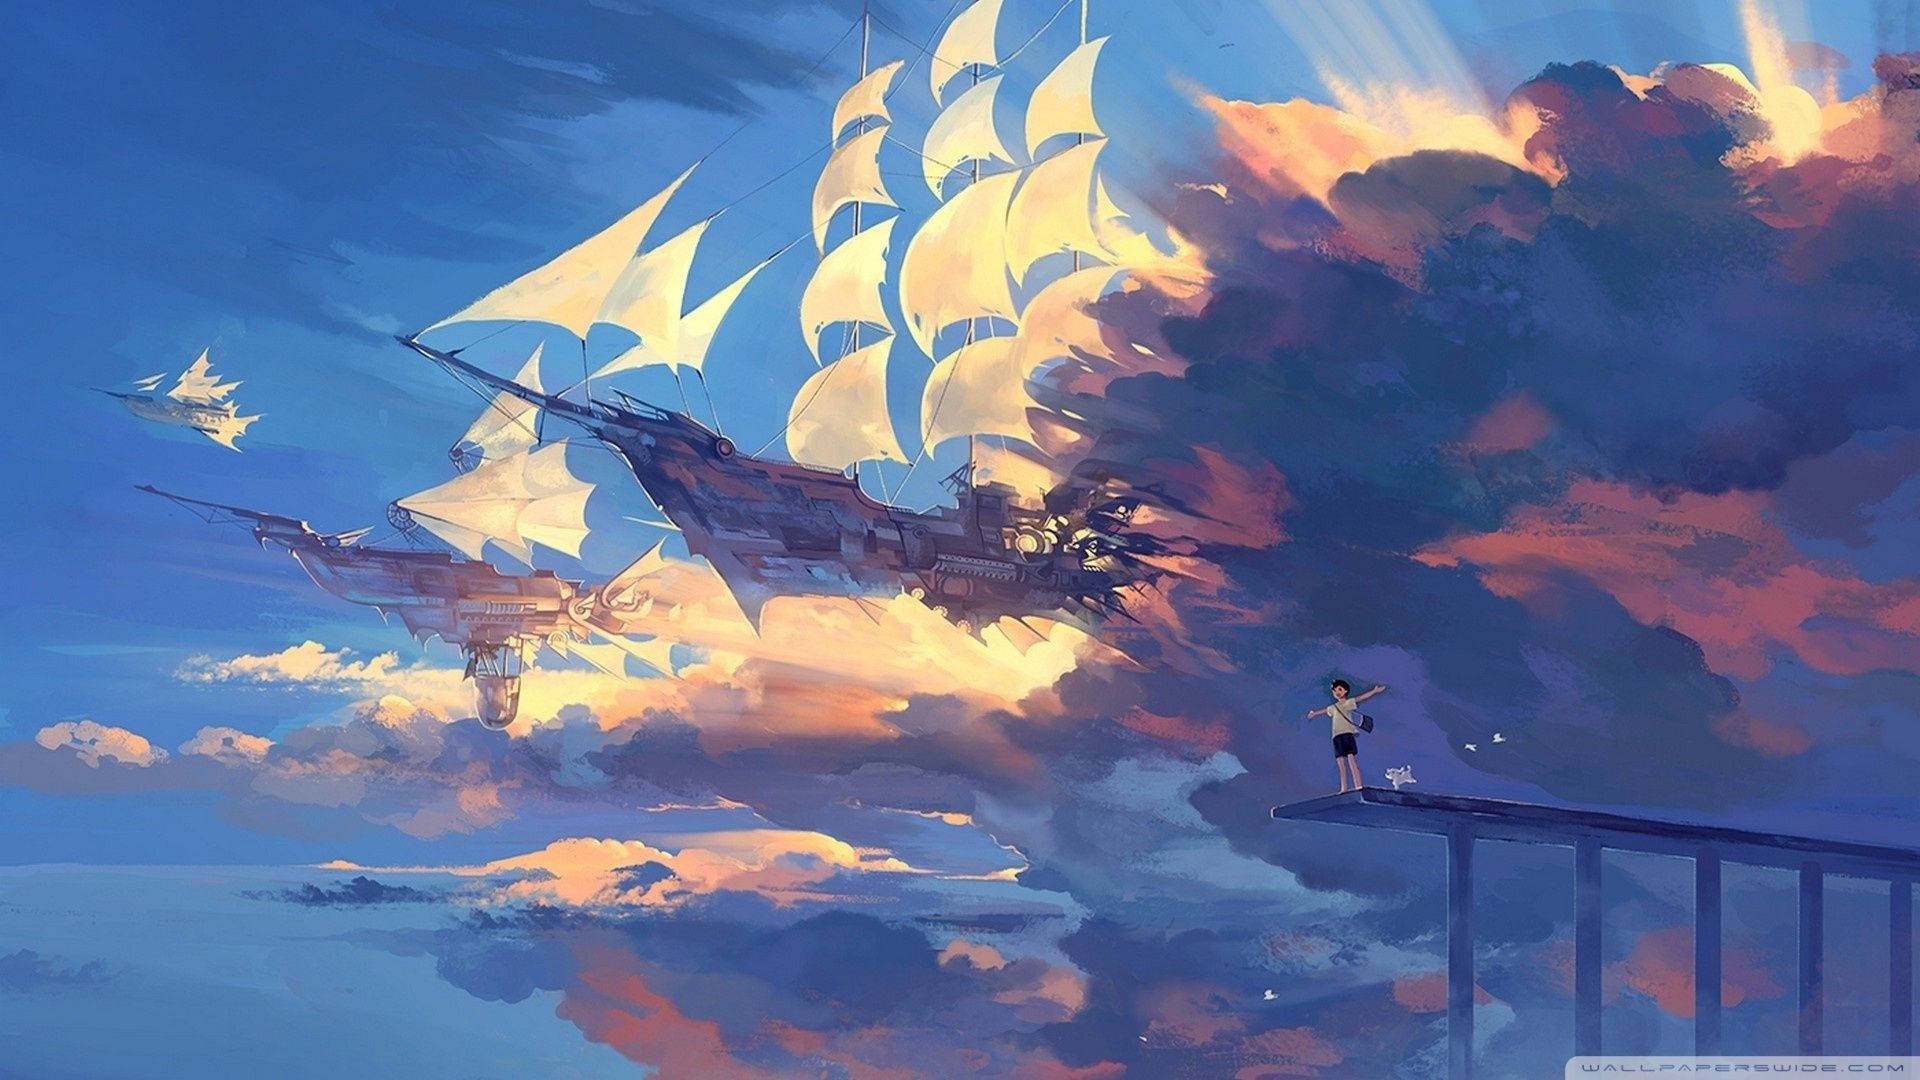 Ship In The Sky Anime Scenery Background